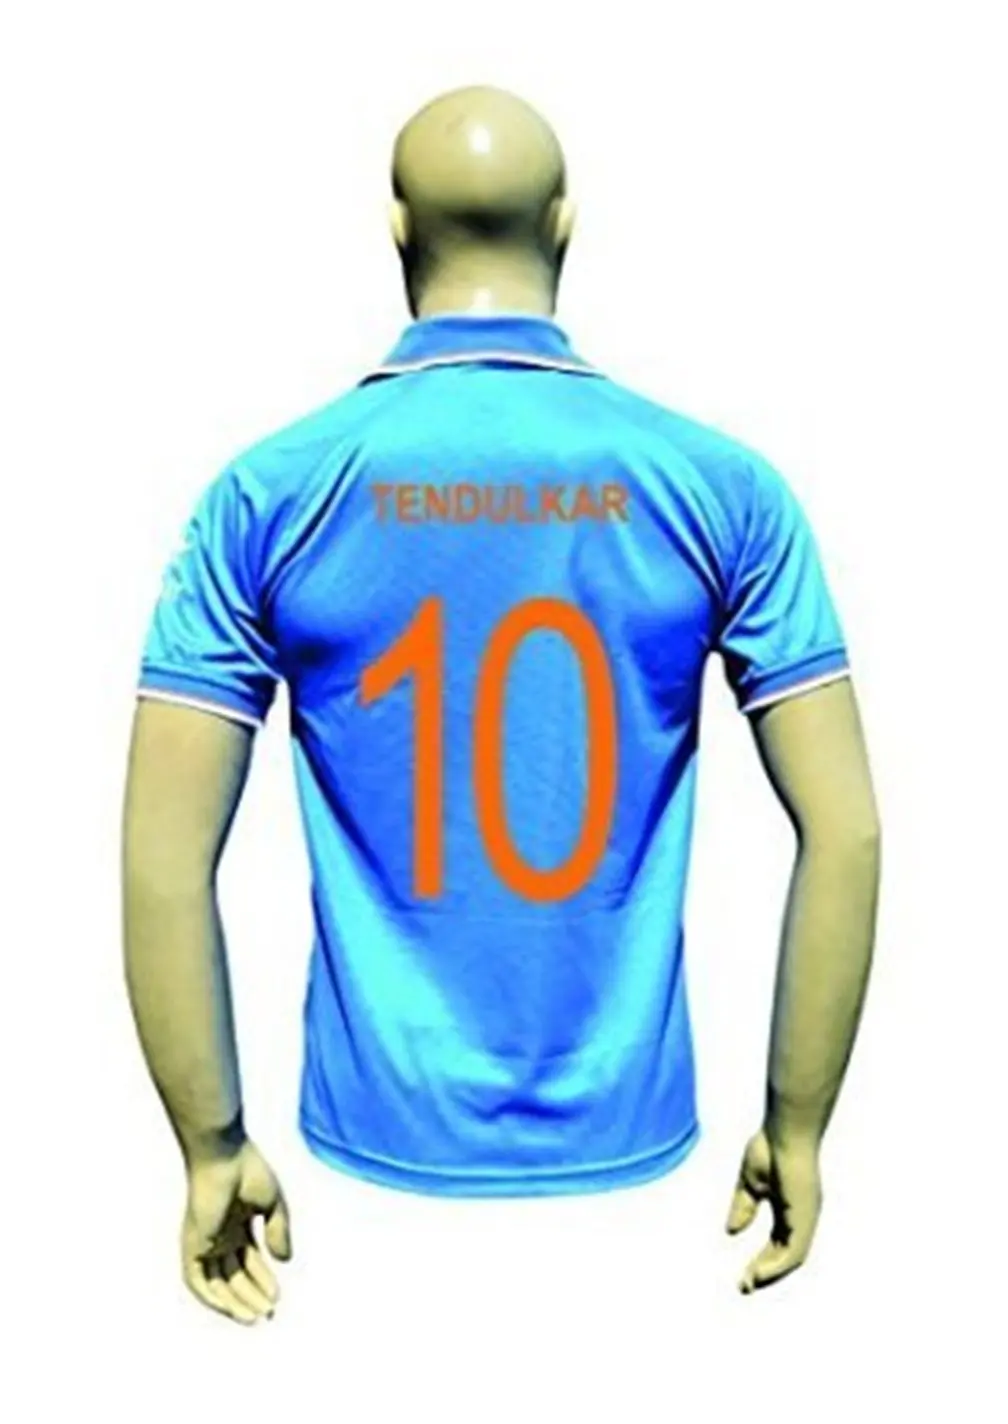 team india t20 jersey